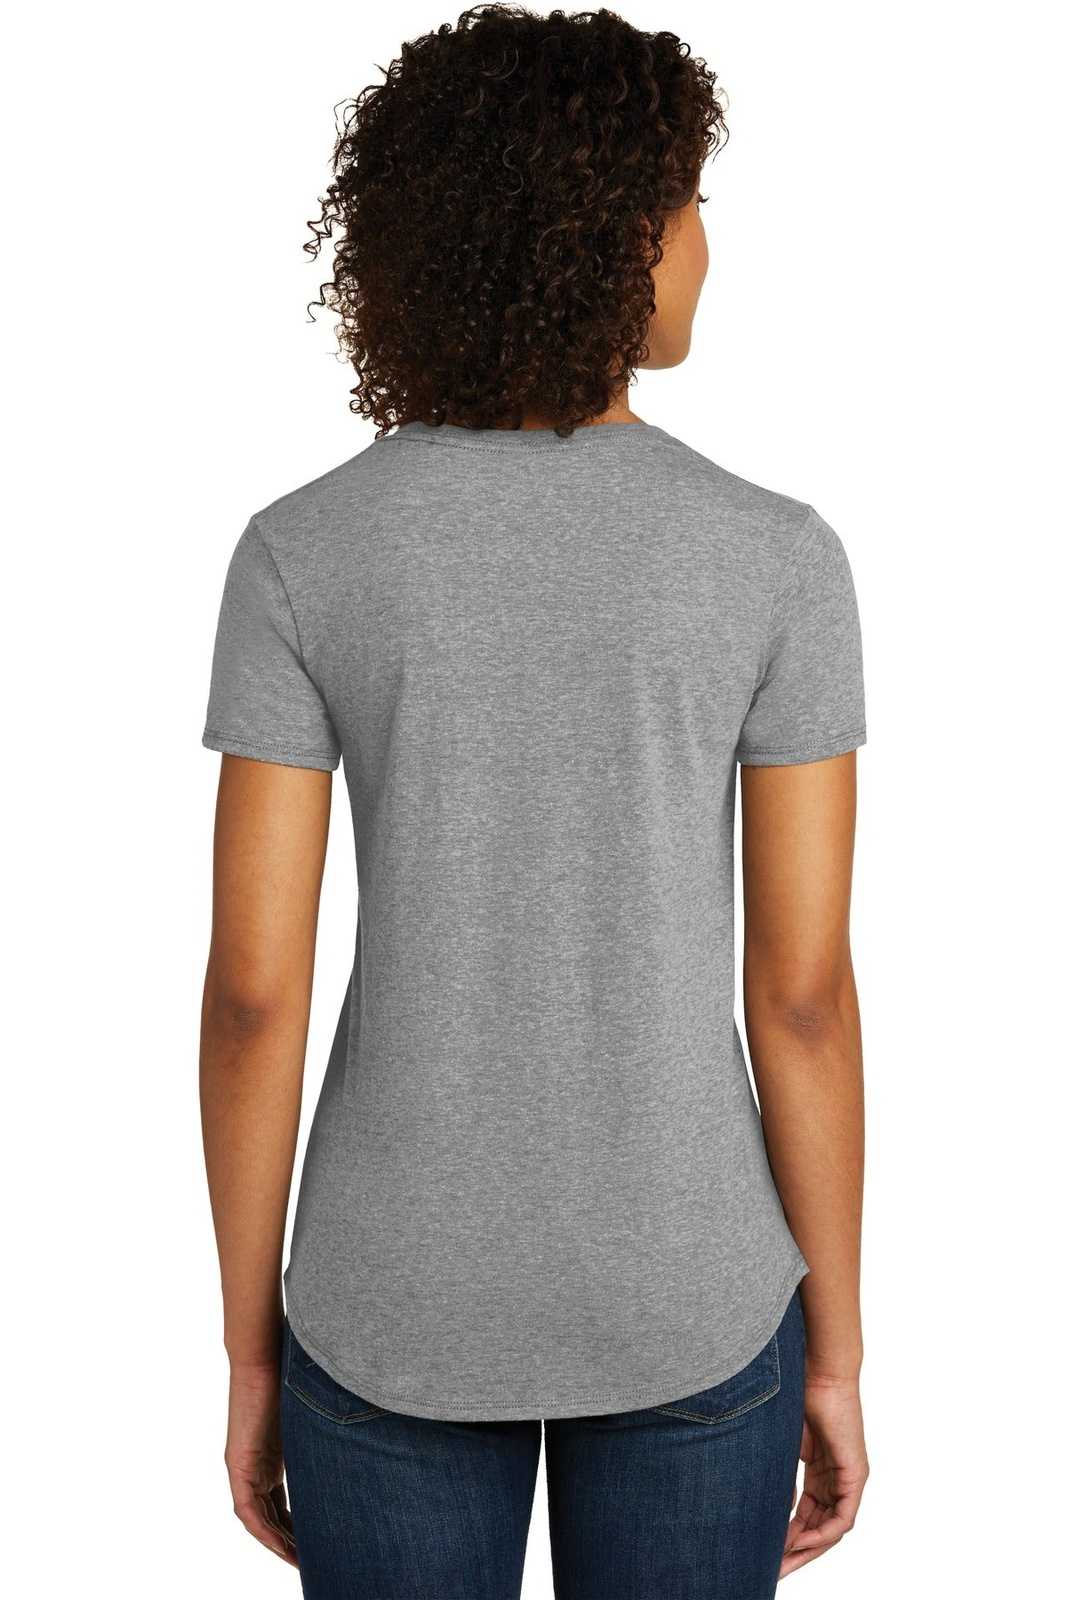 District DT6401 Women's Fitted Very Important Tee Scoop Neck - Gray Frost - HIT a Double - 1